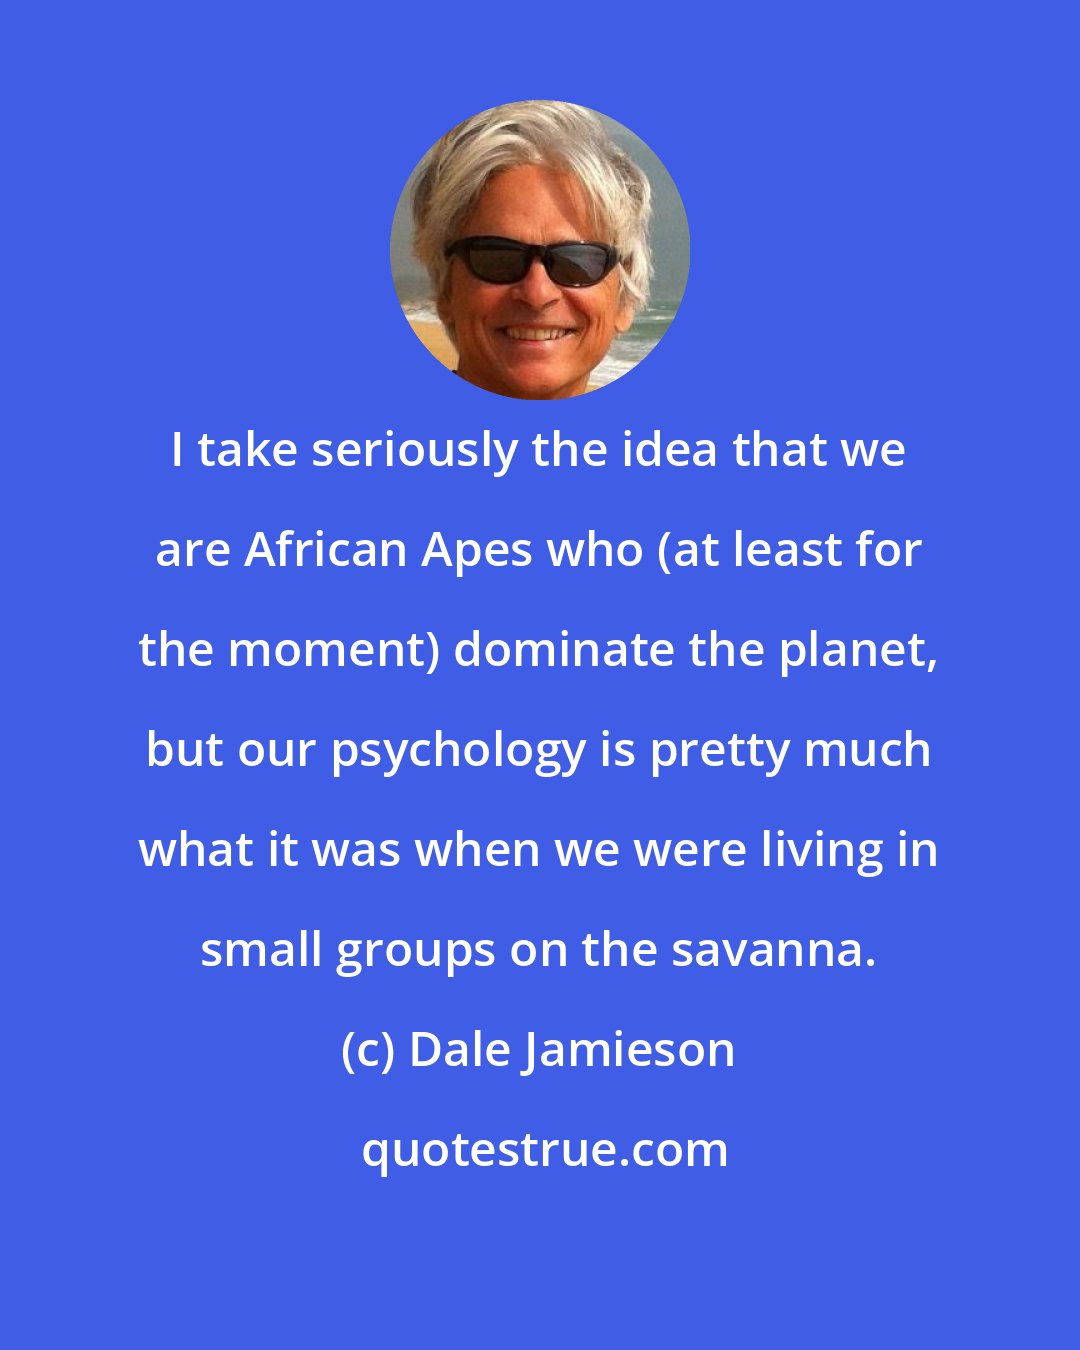 Dale Jamieson: I take seriously the idea that we are African Apes who (at least for the moment) dominate the planet, but our psychology is pretty much what it was when we were living in small groups on the savanna.